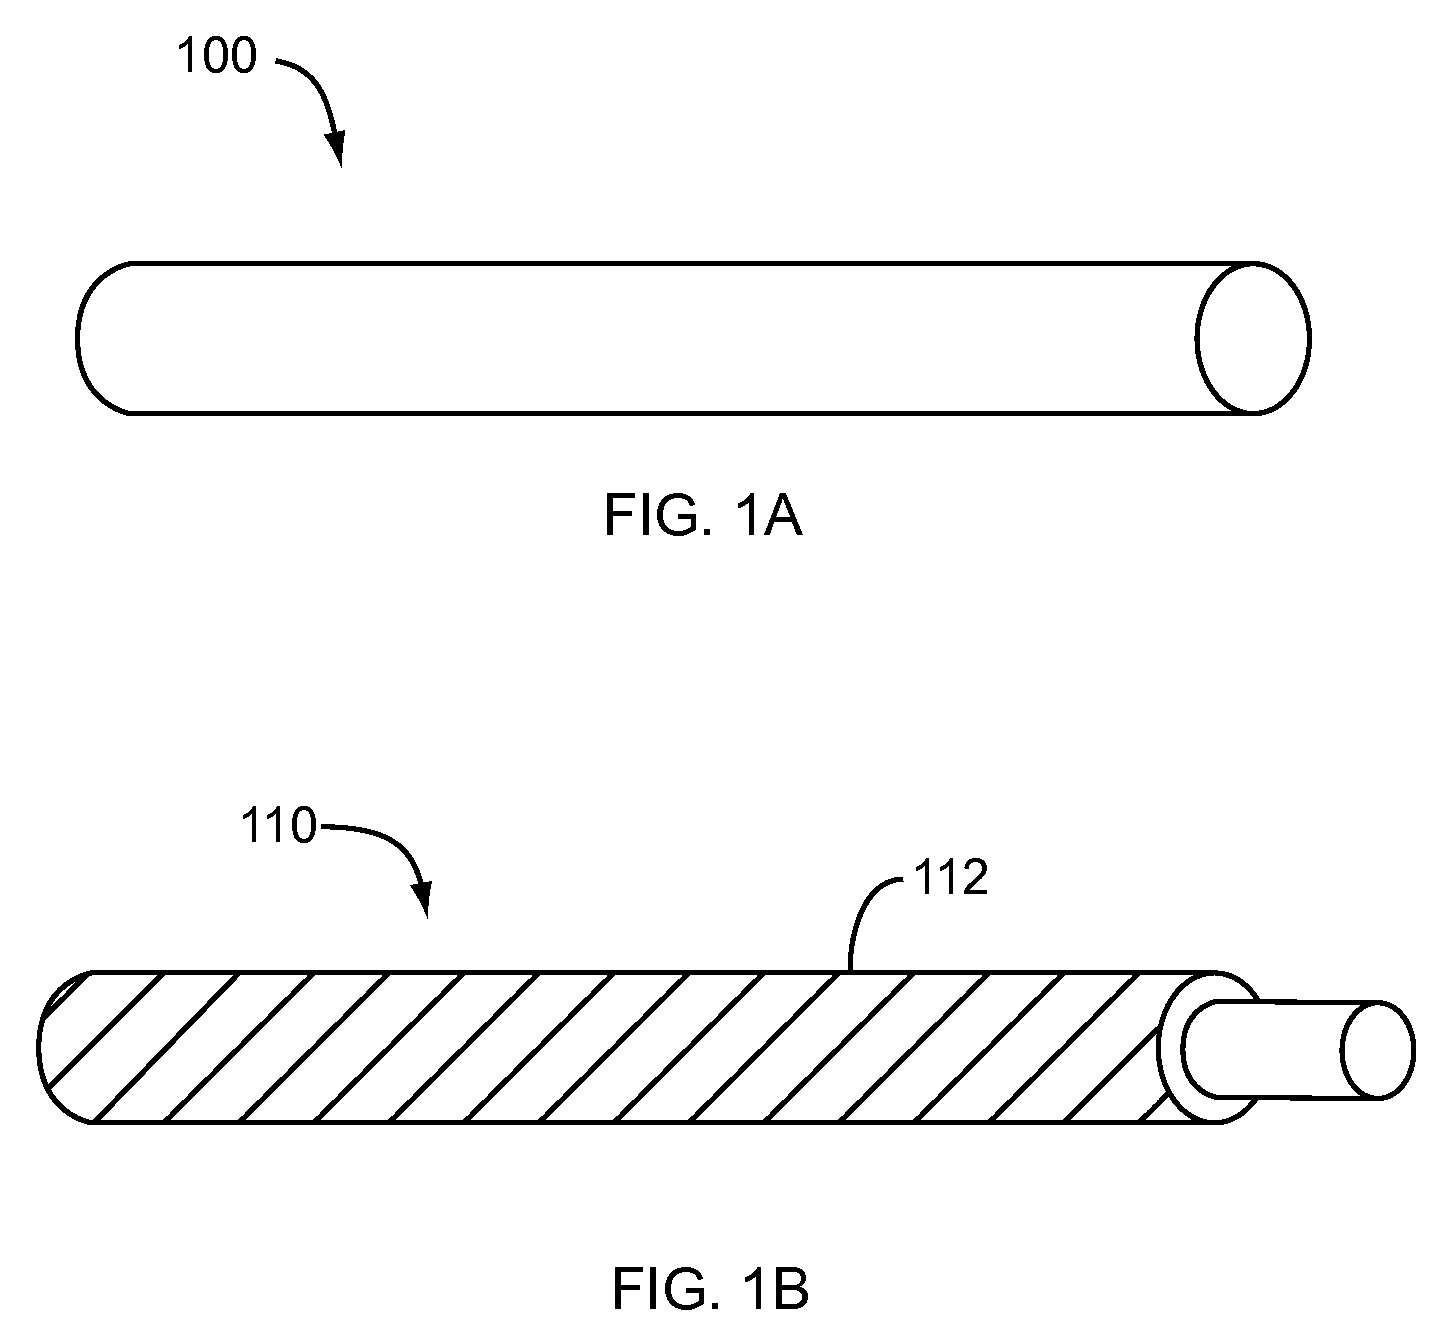 Systems and Methods for Nanowire Growth